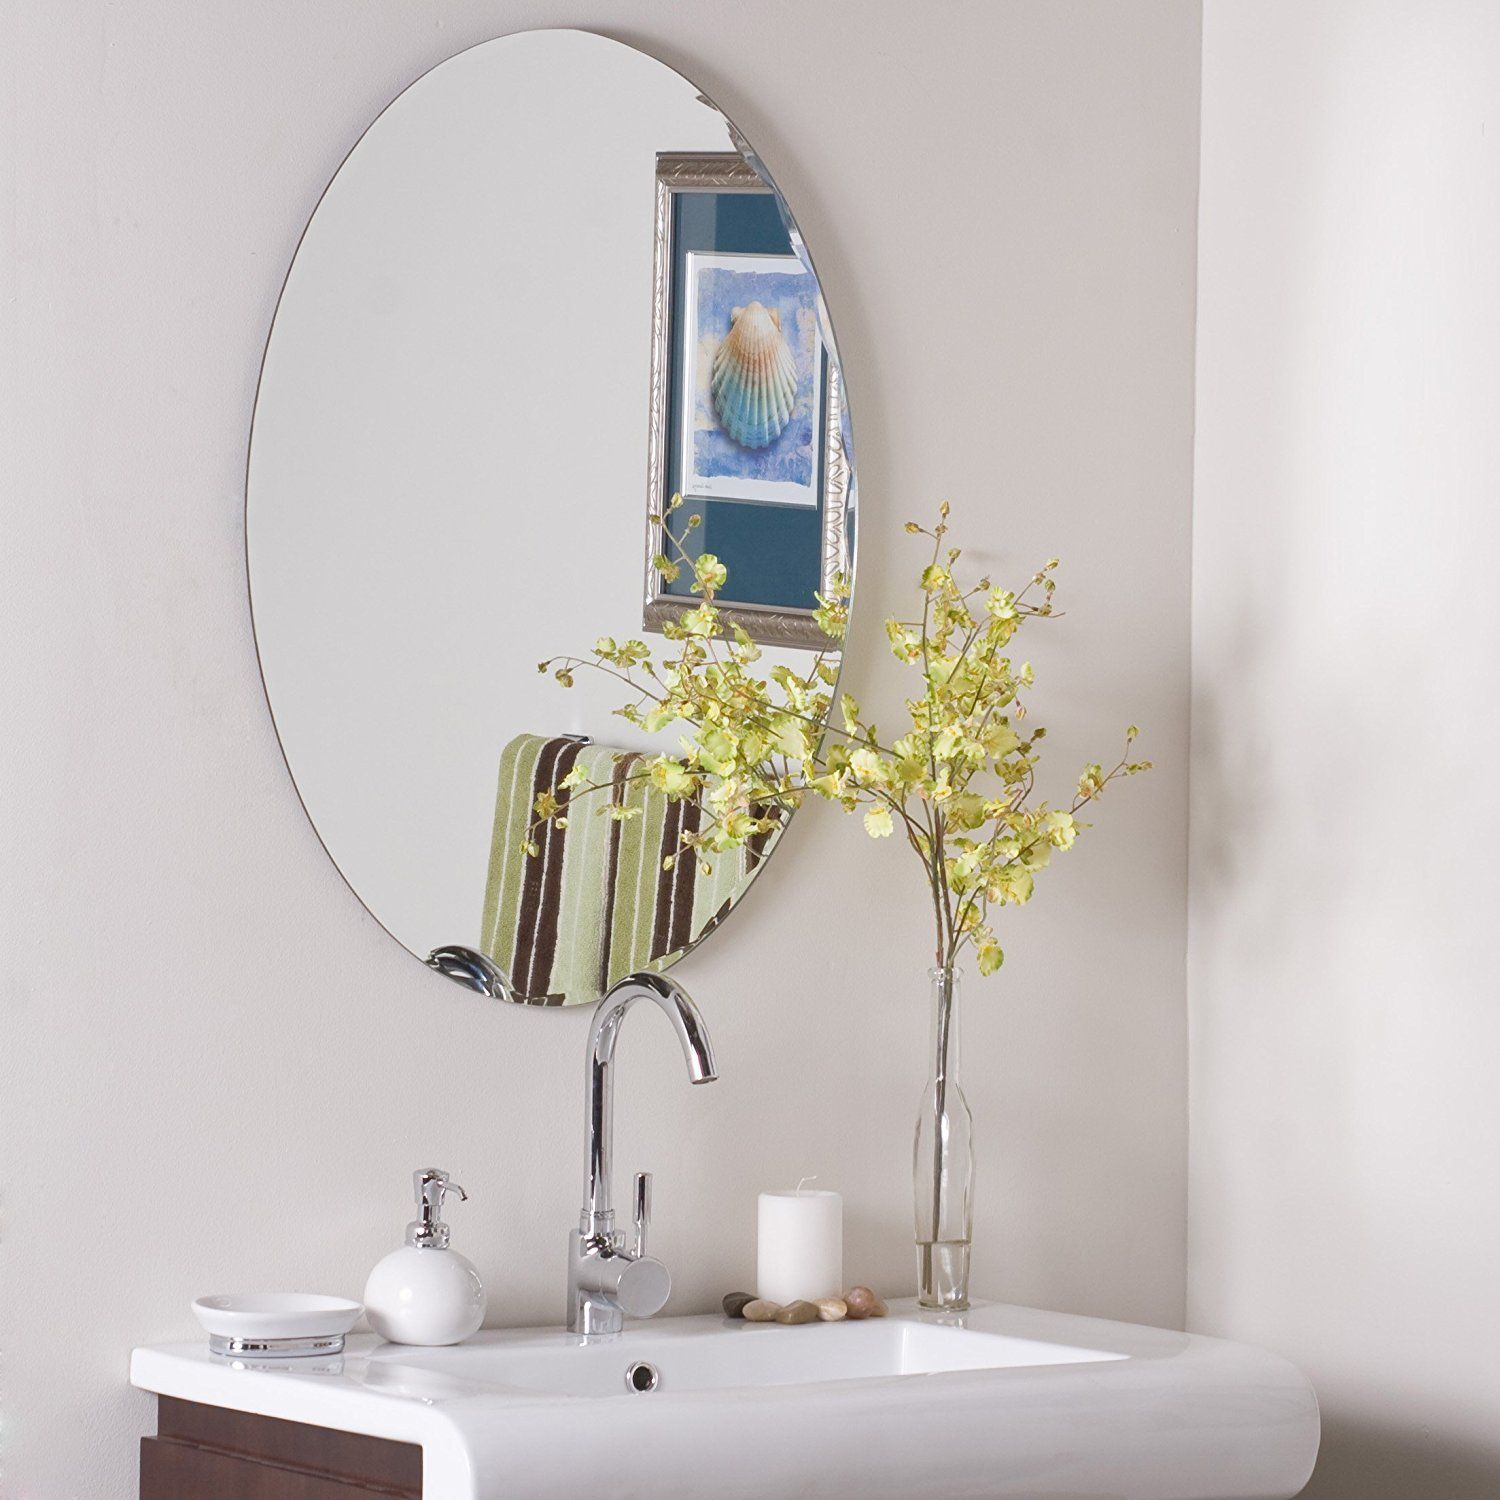 Decor Wonderland Frameless Oval Scallop Beveled Mirror >>> You Can Find With Regard To Reign Frameless Oval Scalloped Beveled Wall Mirrors (Photo 13 of 15)